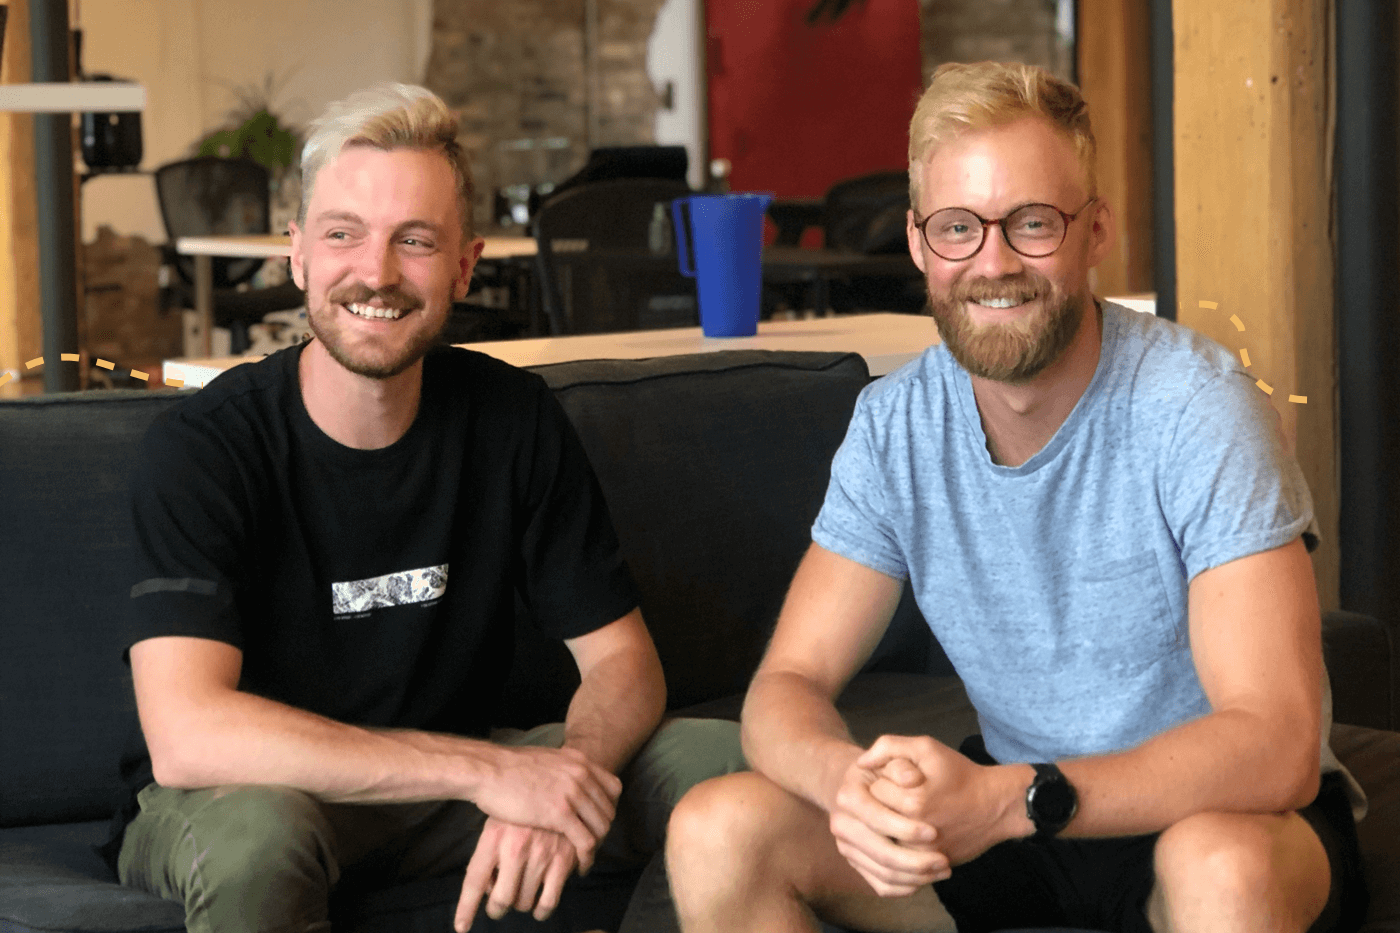 Fireside chat with Hive’s Founders, Pat and Ian